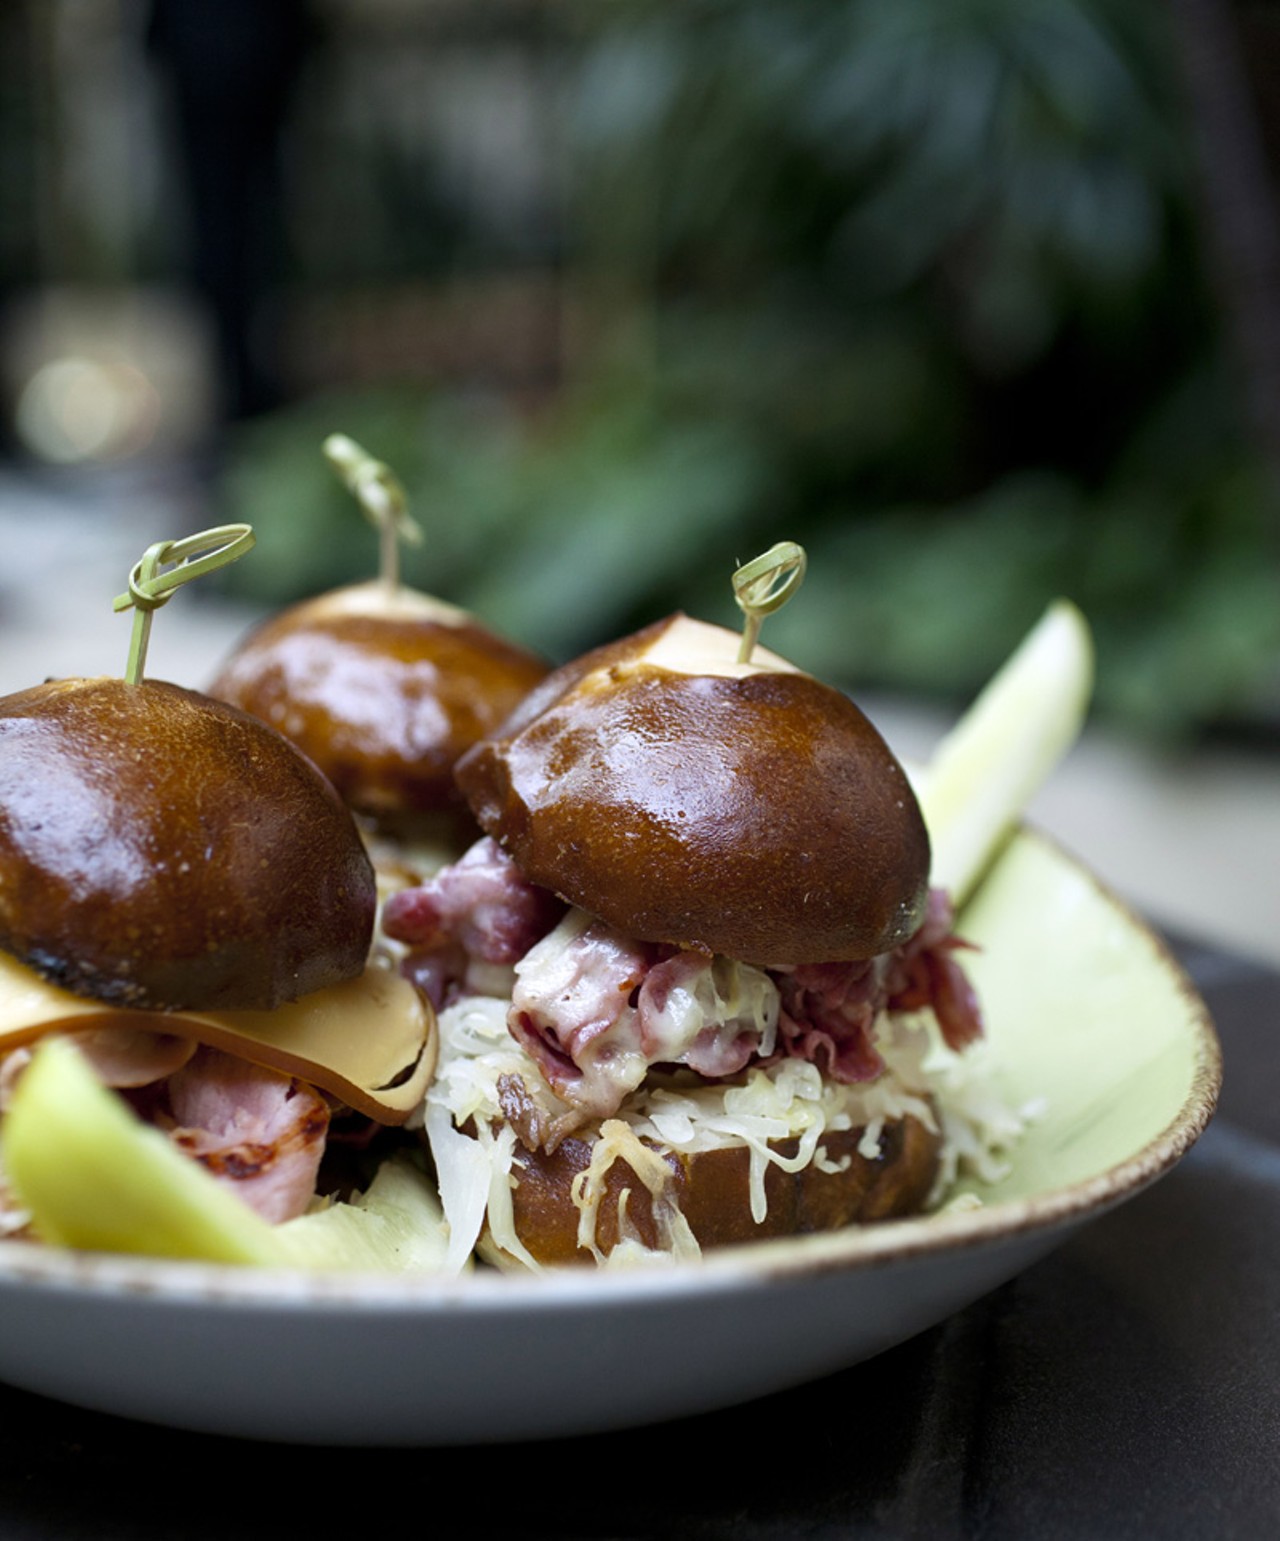 The Mini Pretzel Sliders are three "sammys" on fresh pretzel bread: thin prime rib with caramelized onions, grilled ham with gouda and purple mustard, and corned beef brisket with sauerkraut, swiss cheese and
Russian dressing.